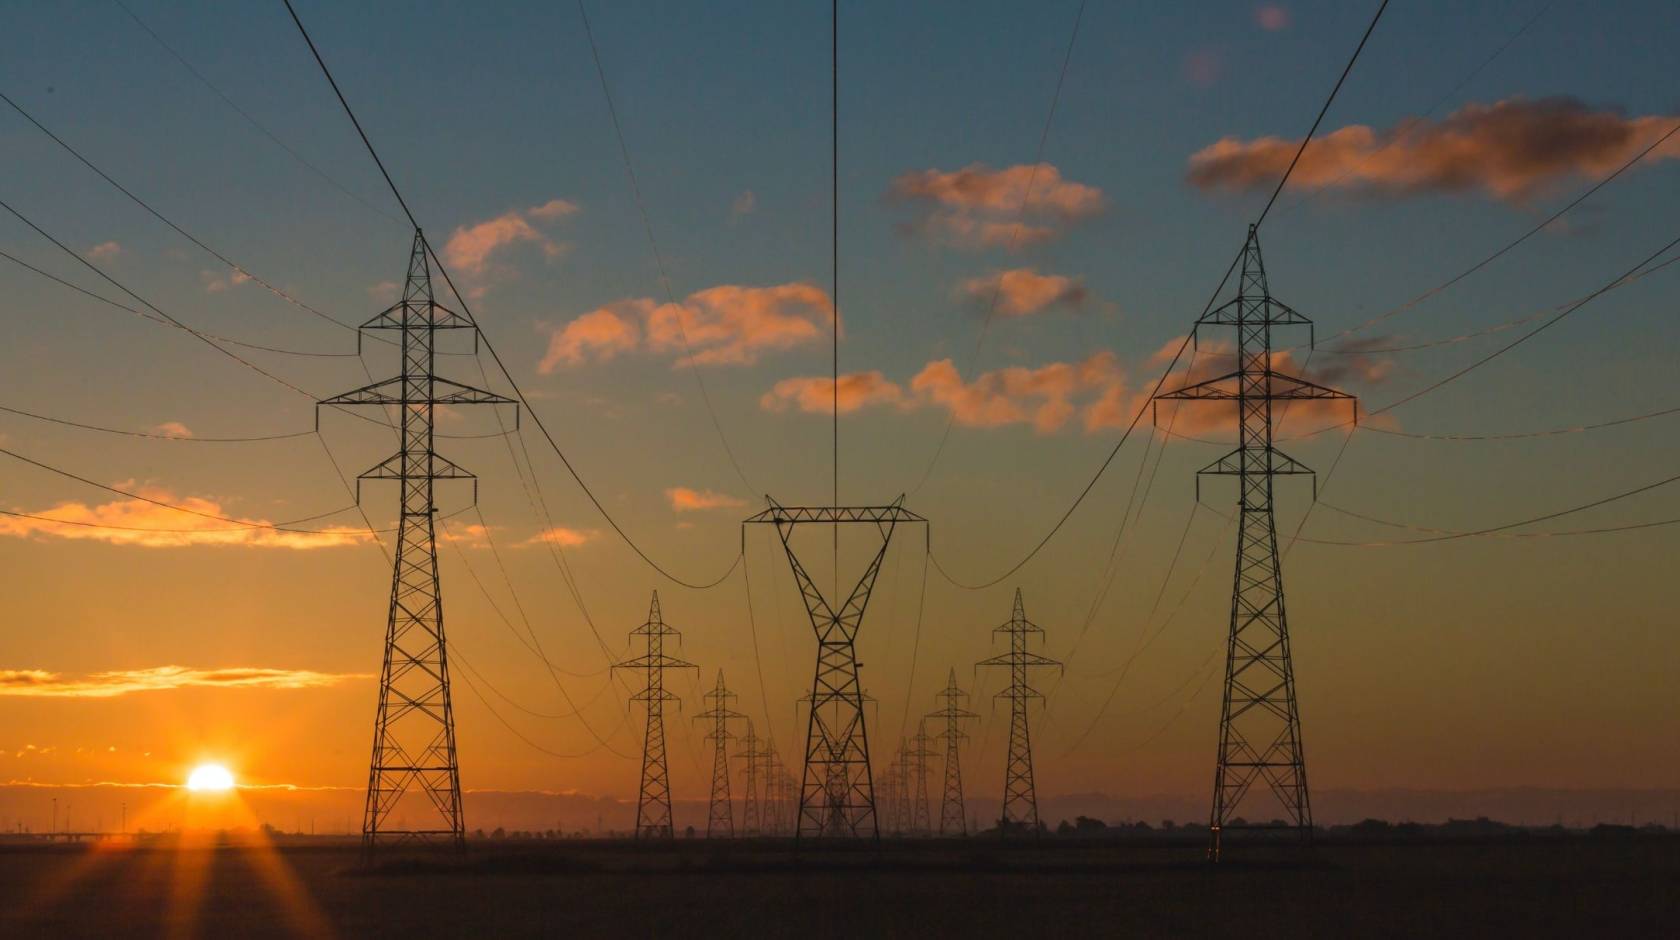 A hazy sunset behind electrical transmission towers, composed symmetrically in frame